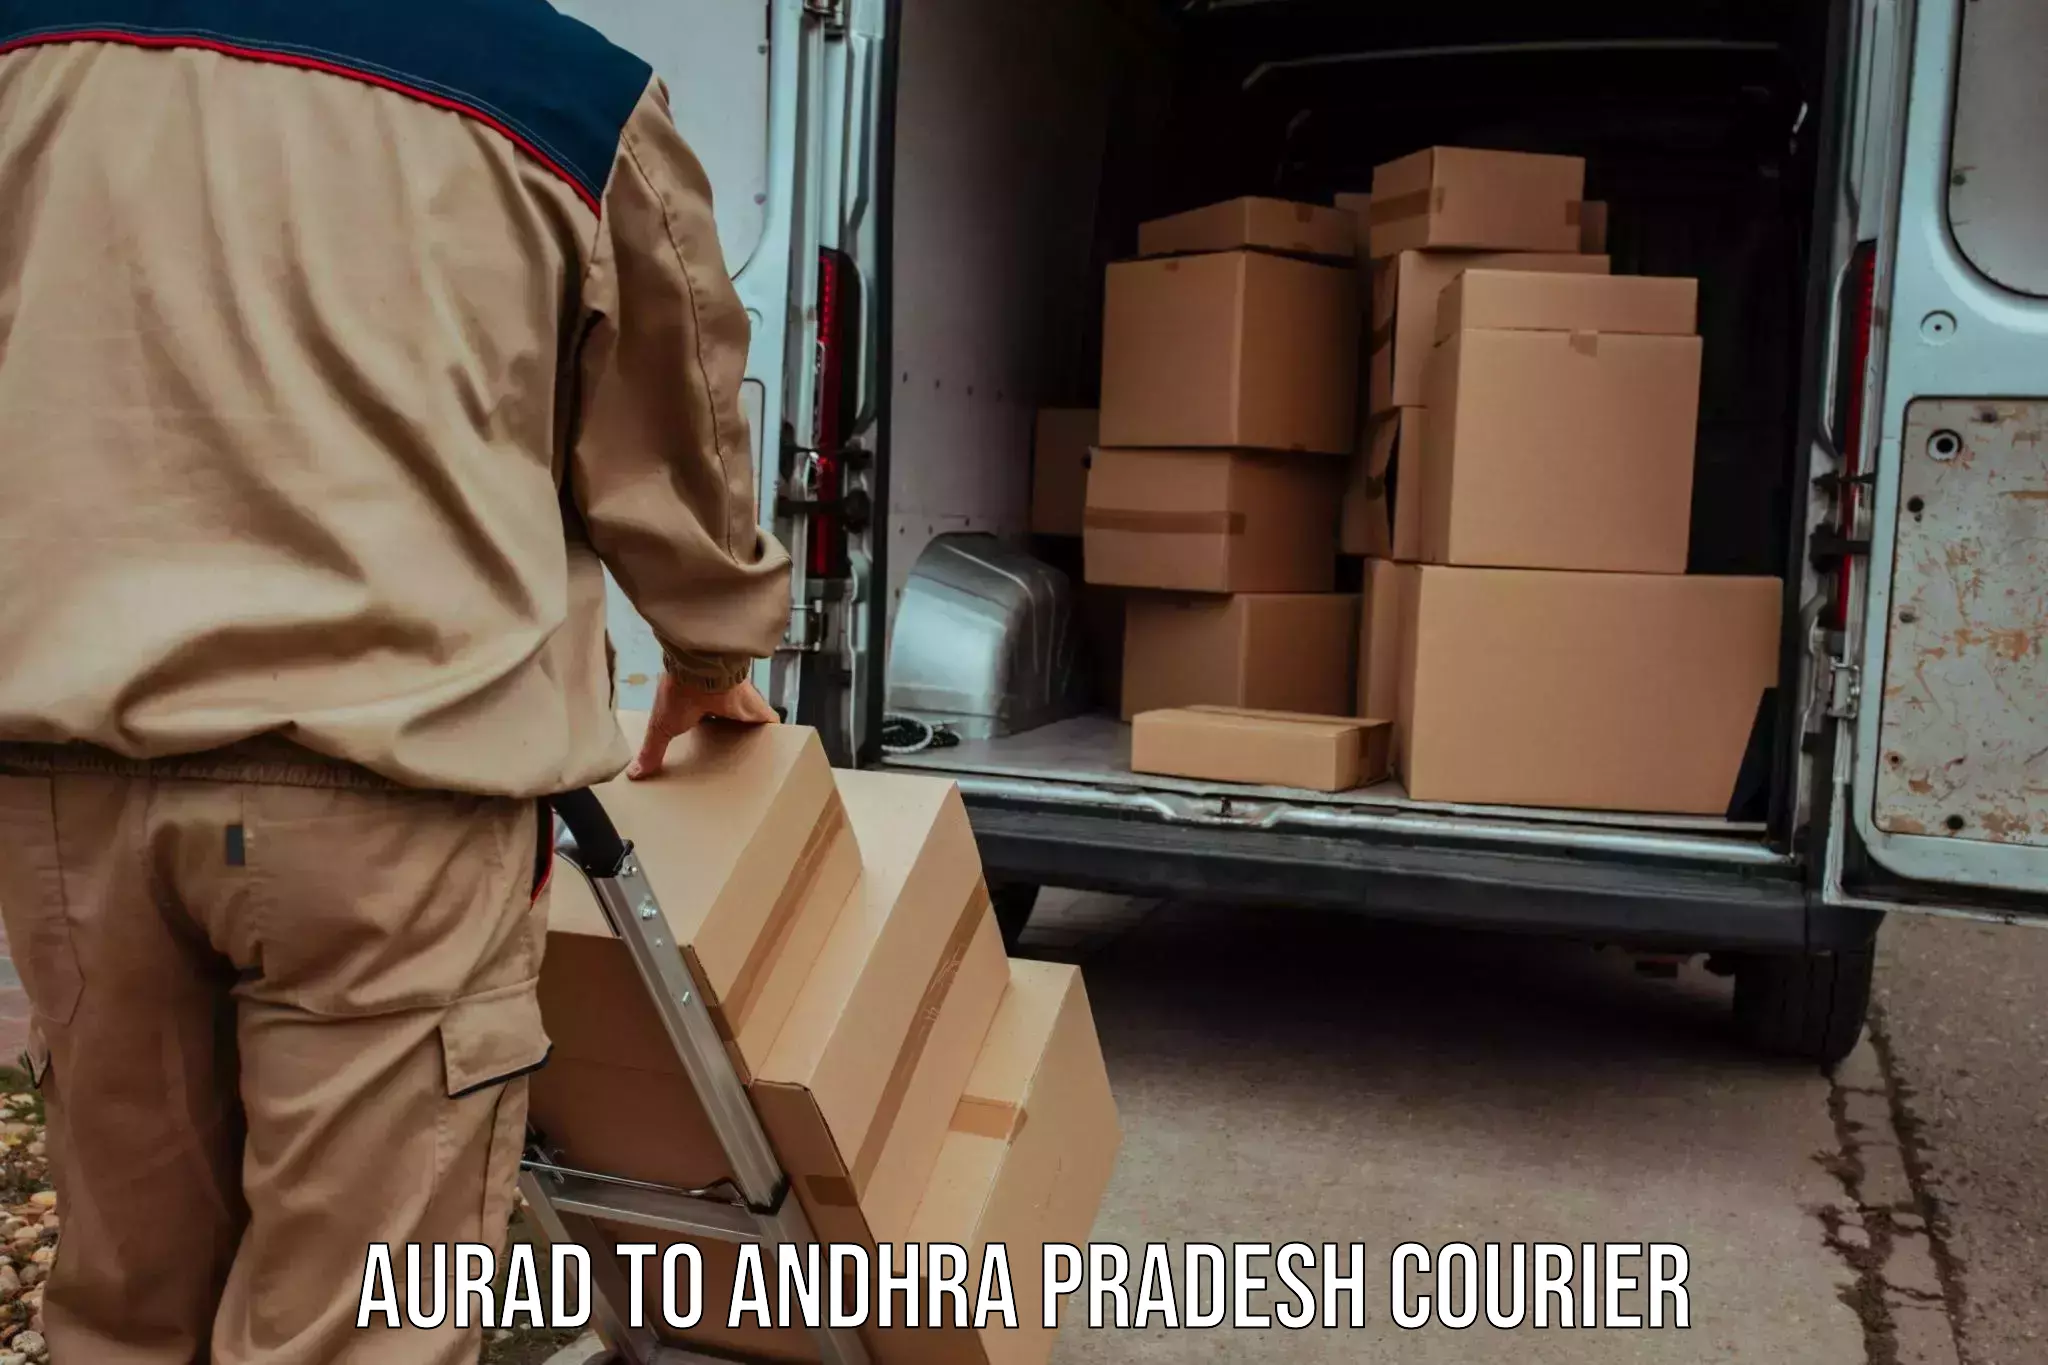 Express delivery network Aurad to Andhra Pradesh